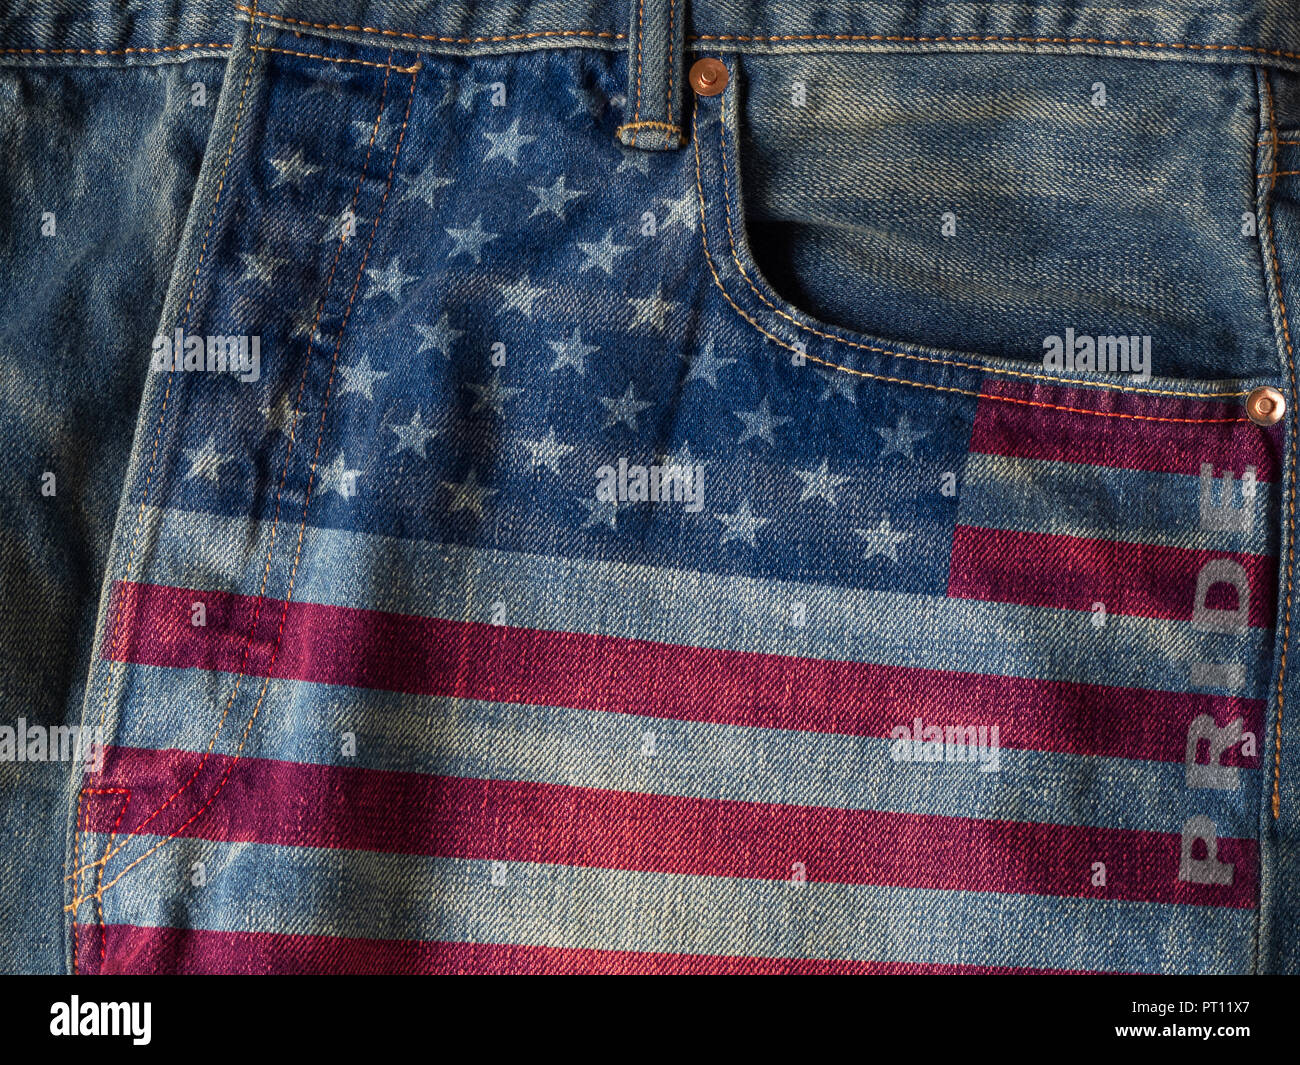 USA flag with pride word on denim blue jeans background concept Stock Photo  - Alamy